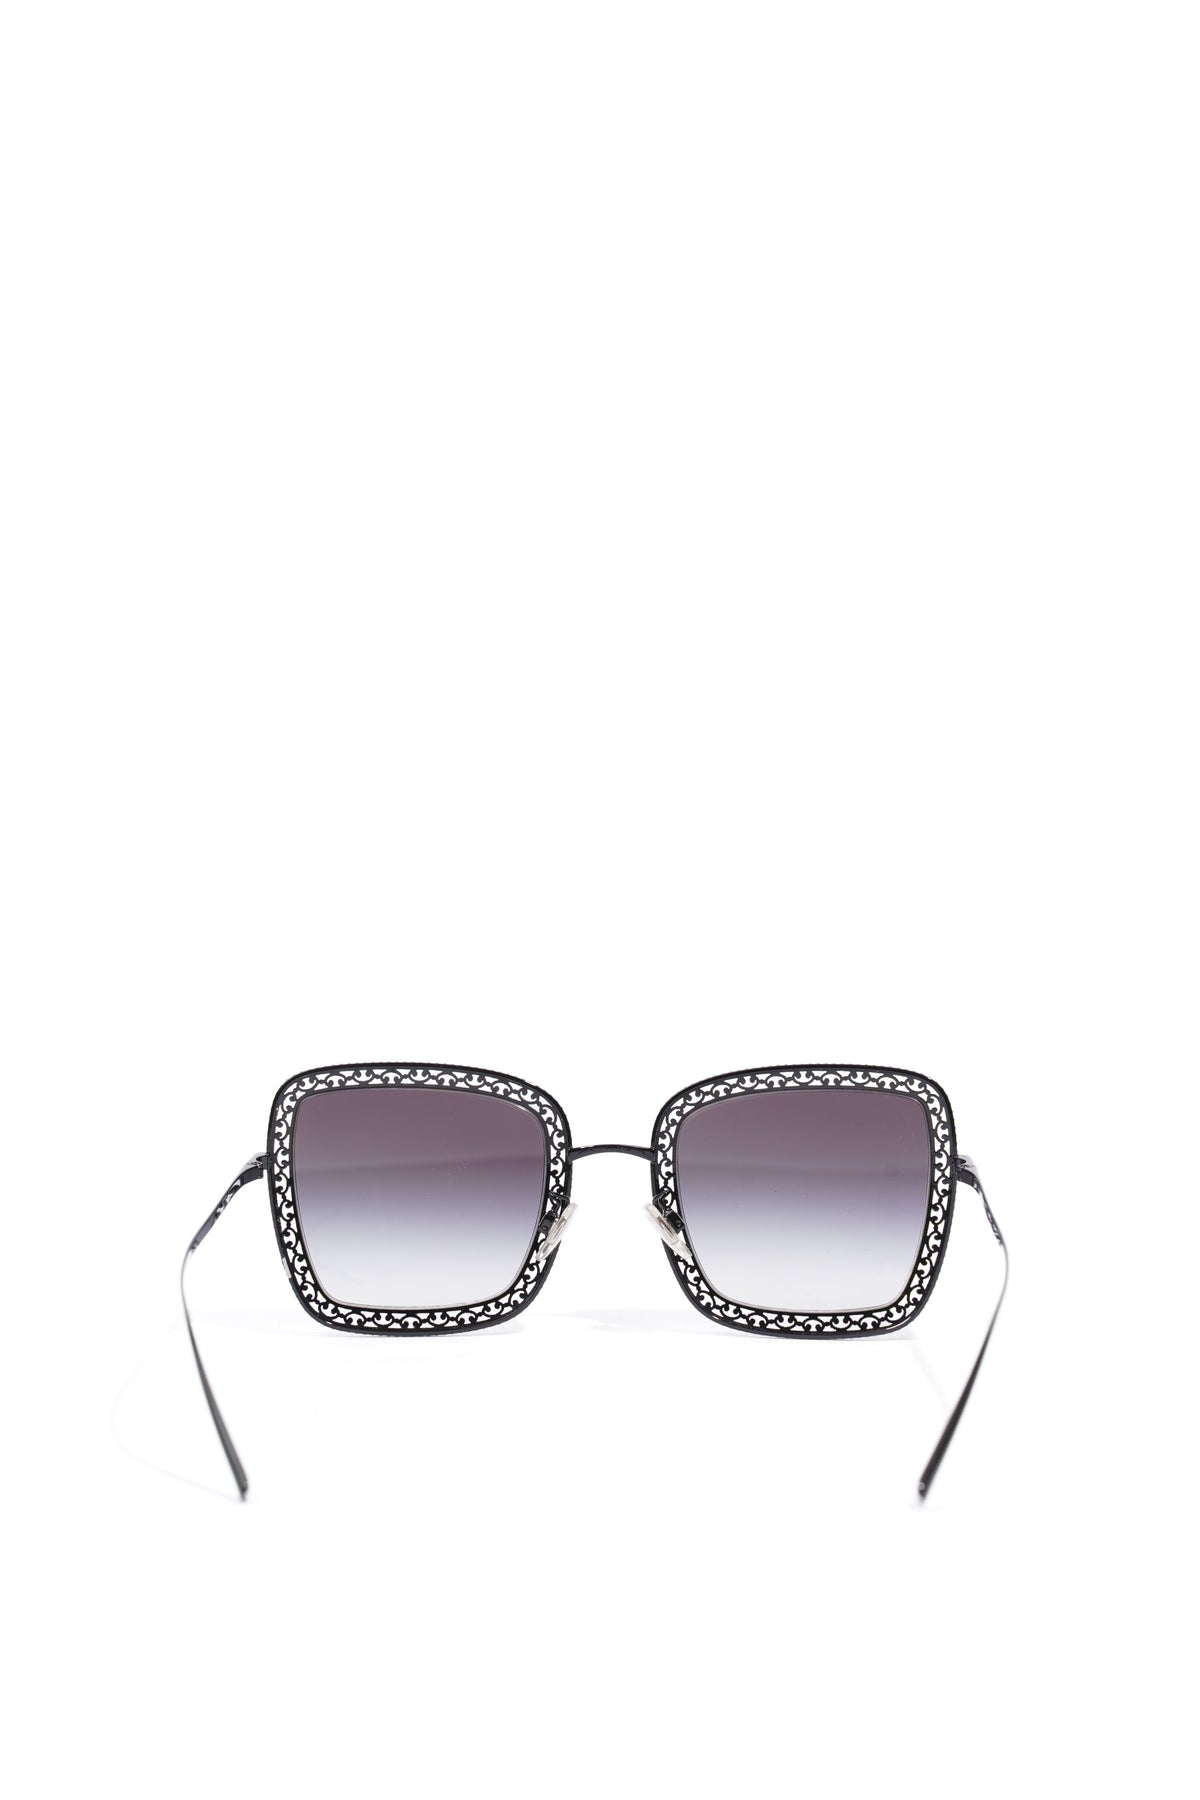 Dolce and Gabbana Square Embroidery Detail Sunglasses Black Base Metal ...